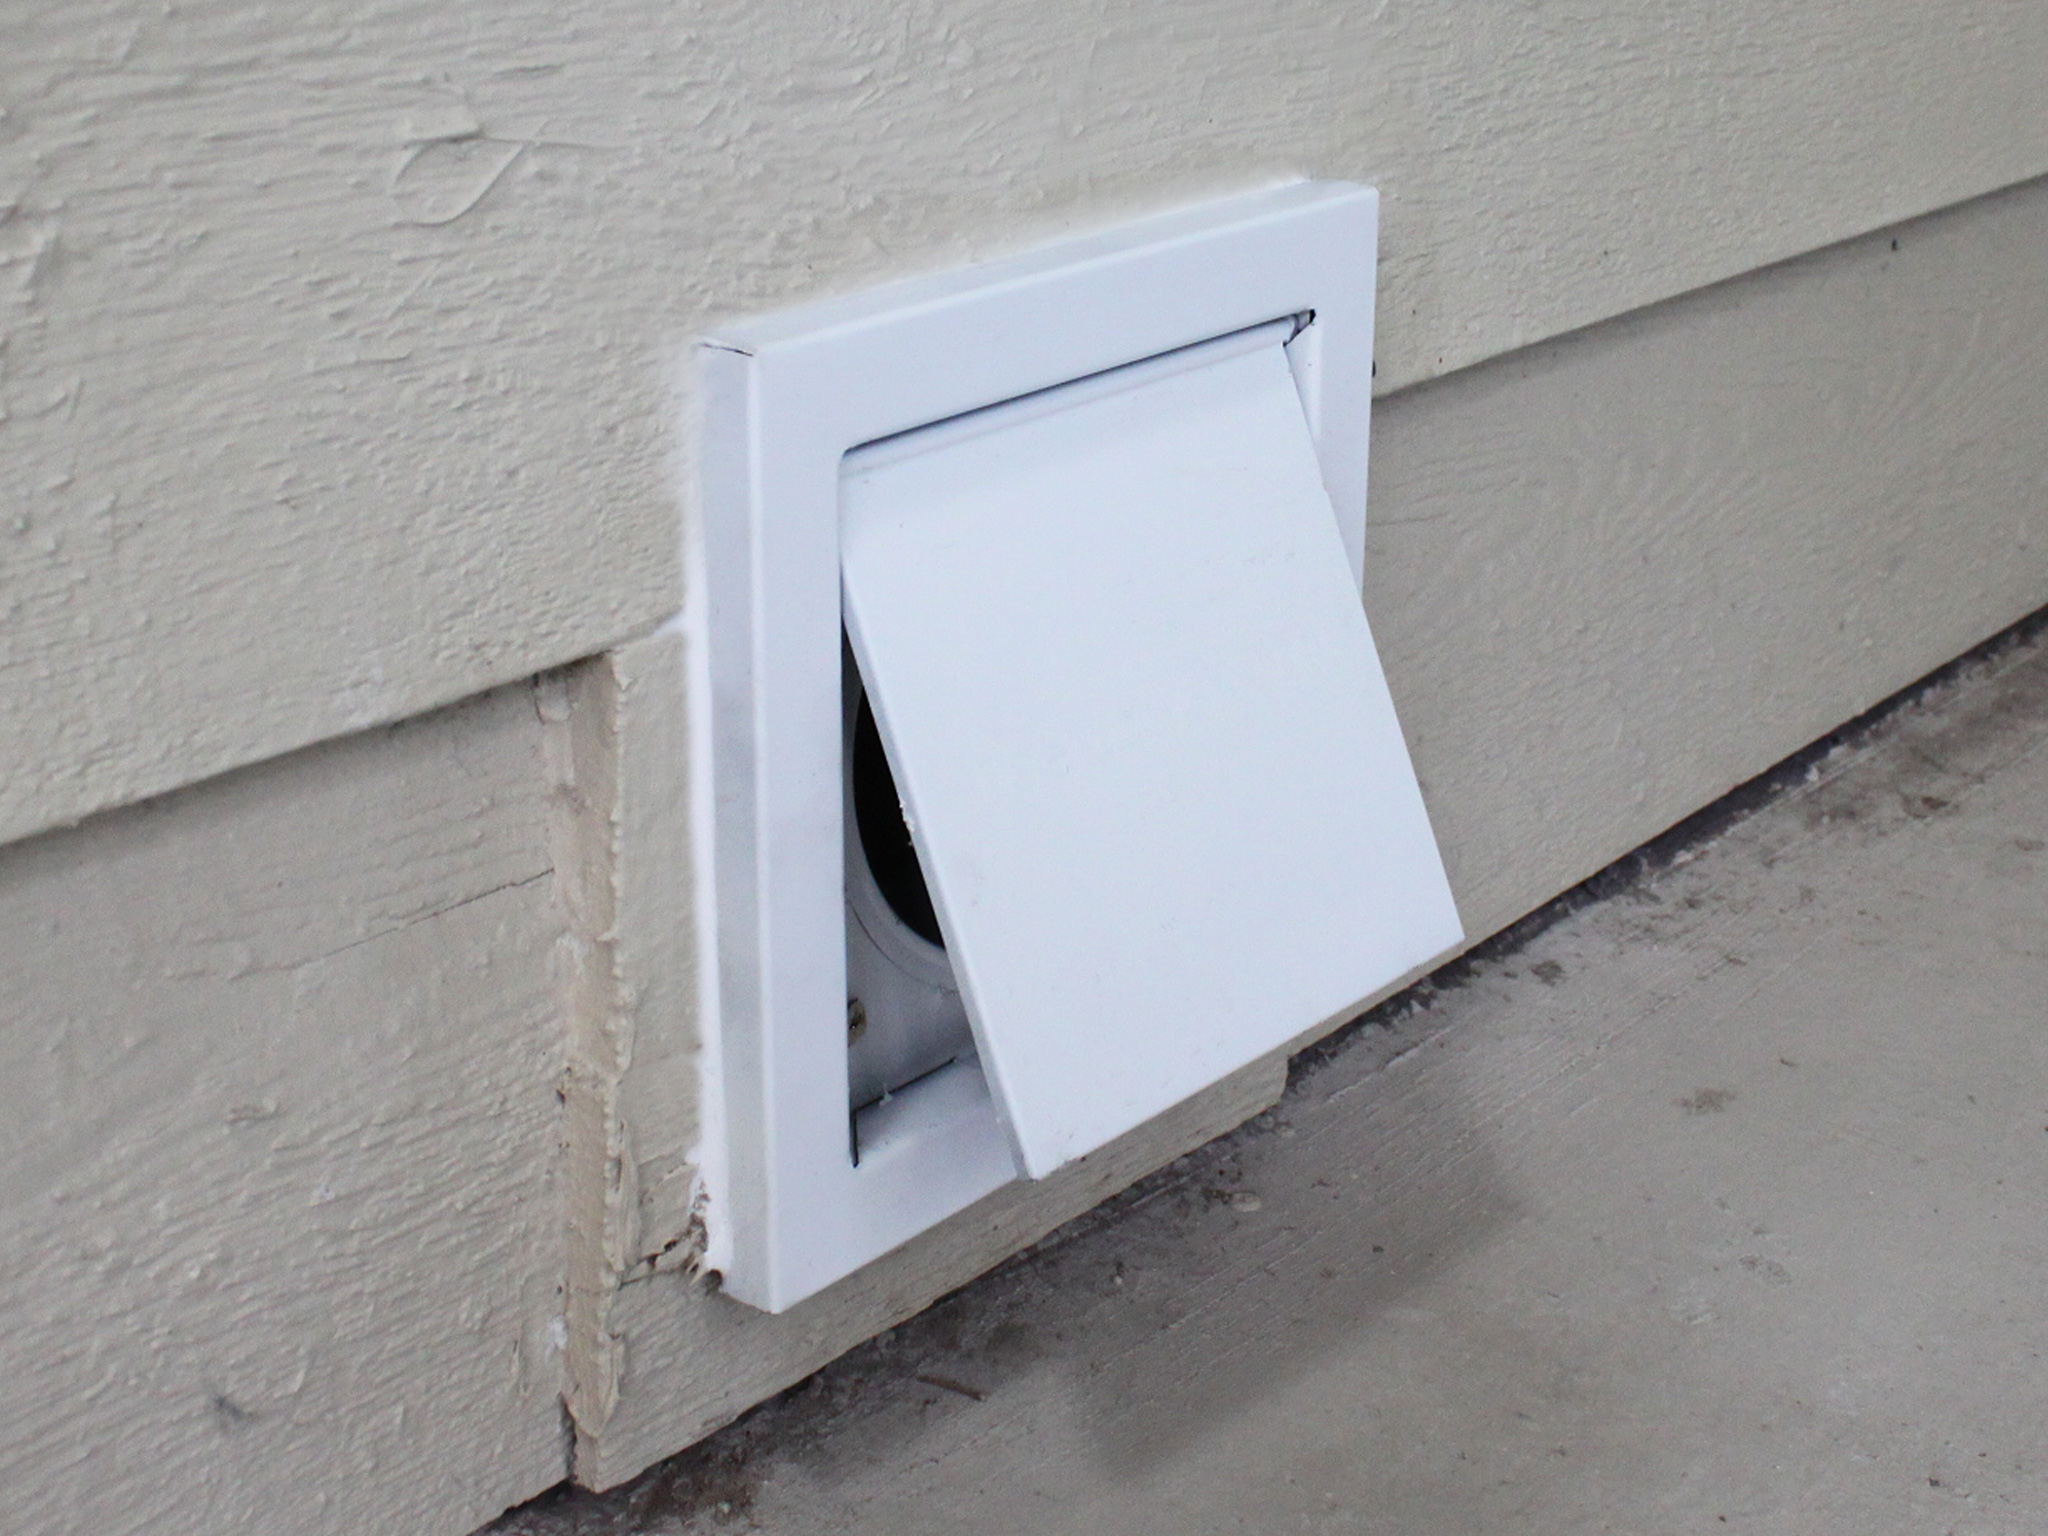 Wall Vent Pictures | Photo Gallery